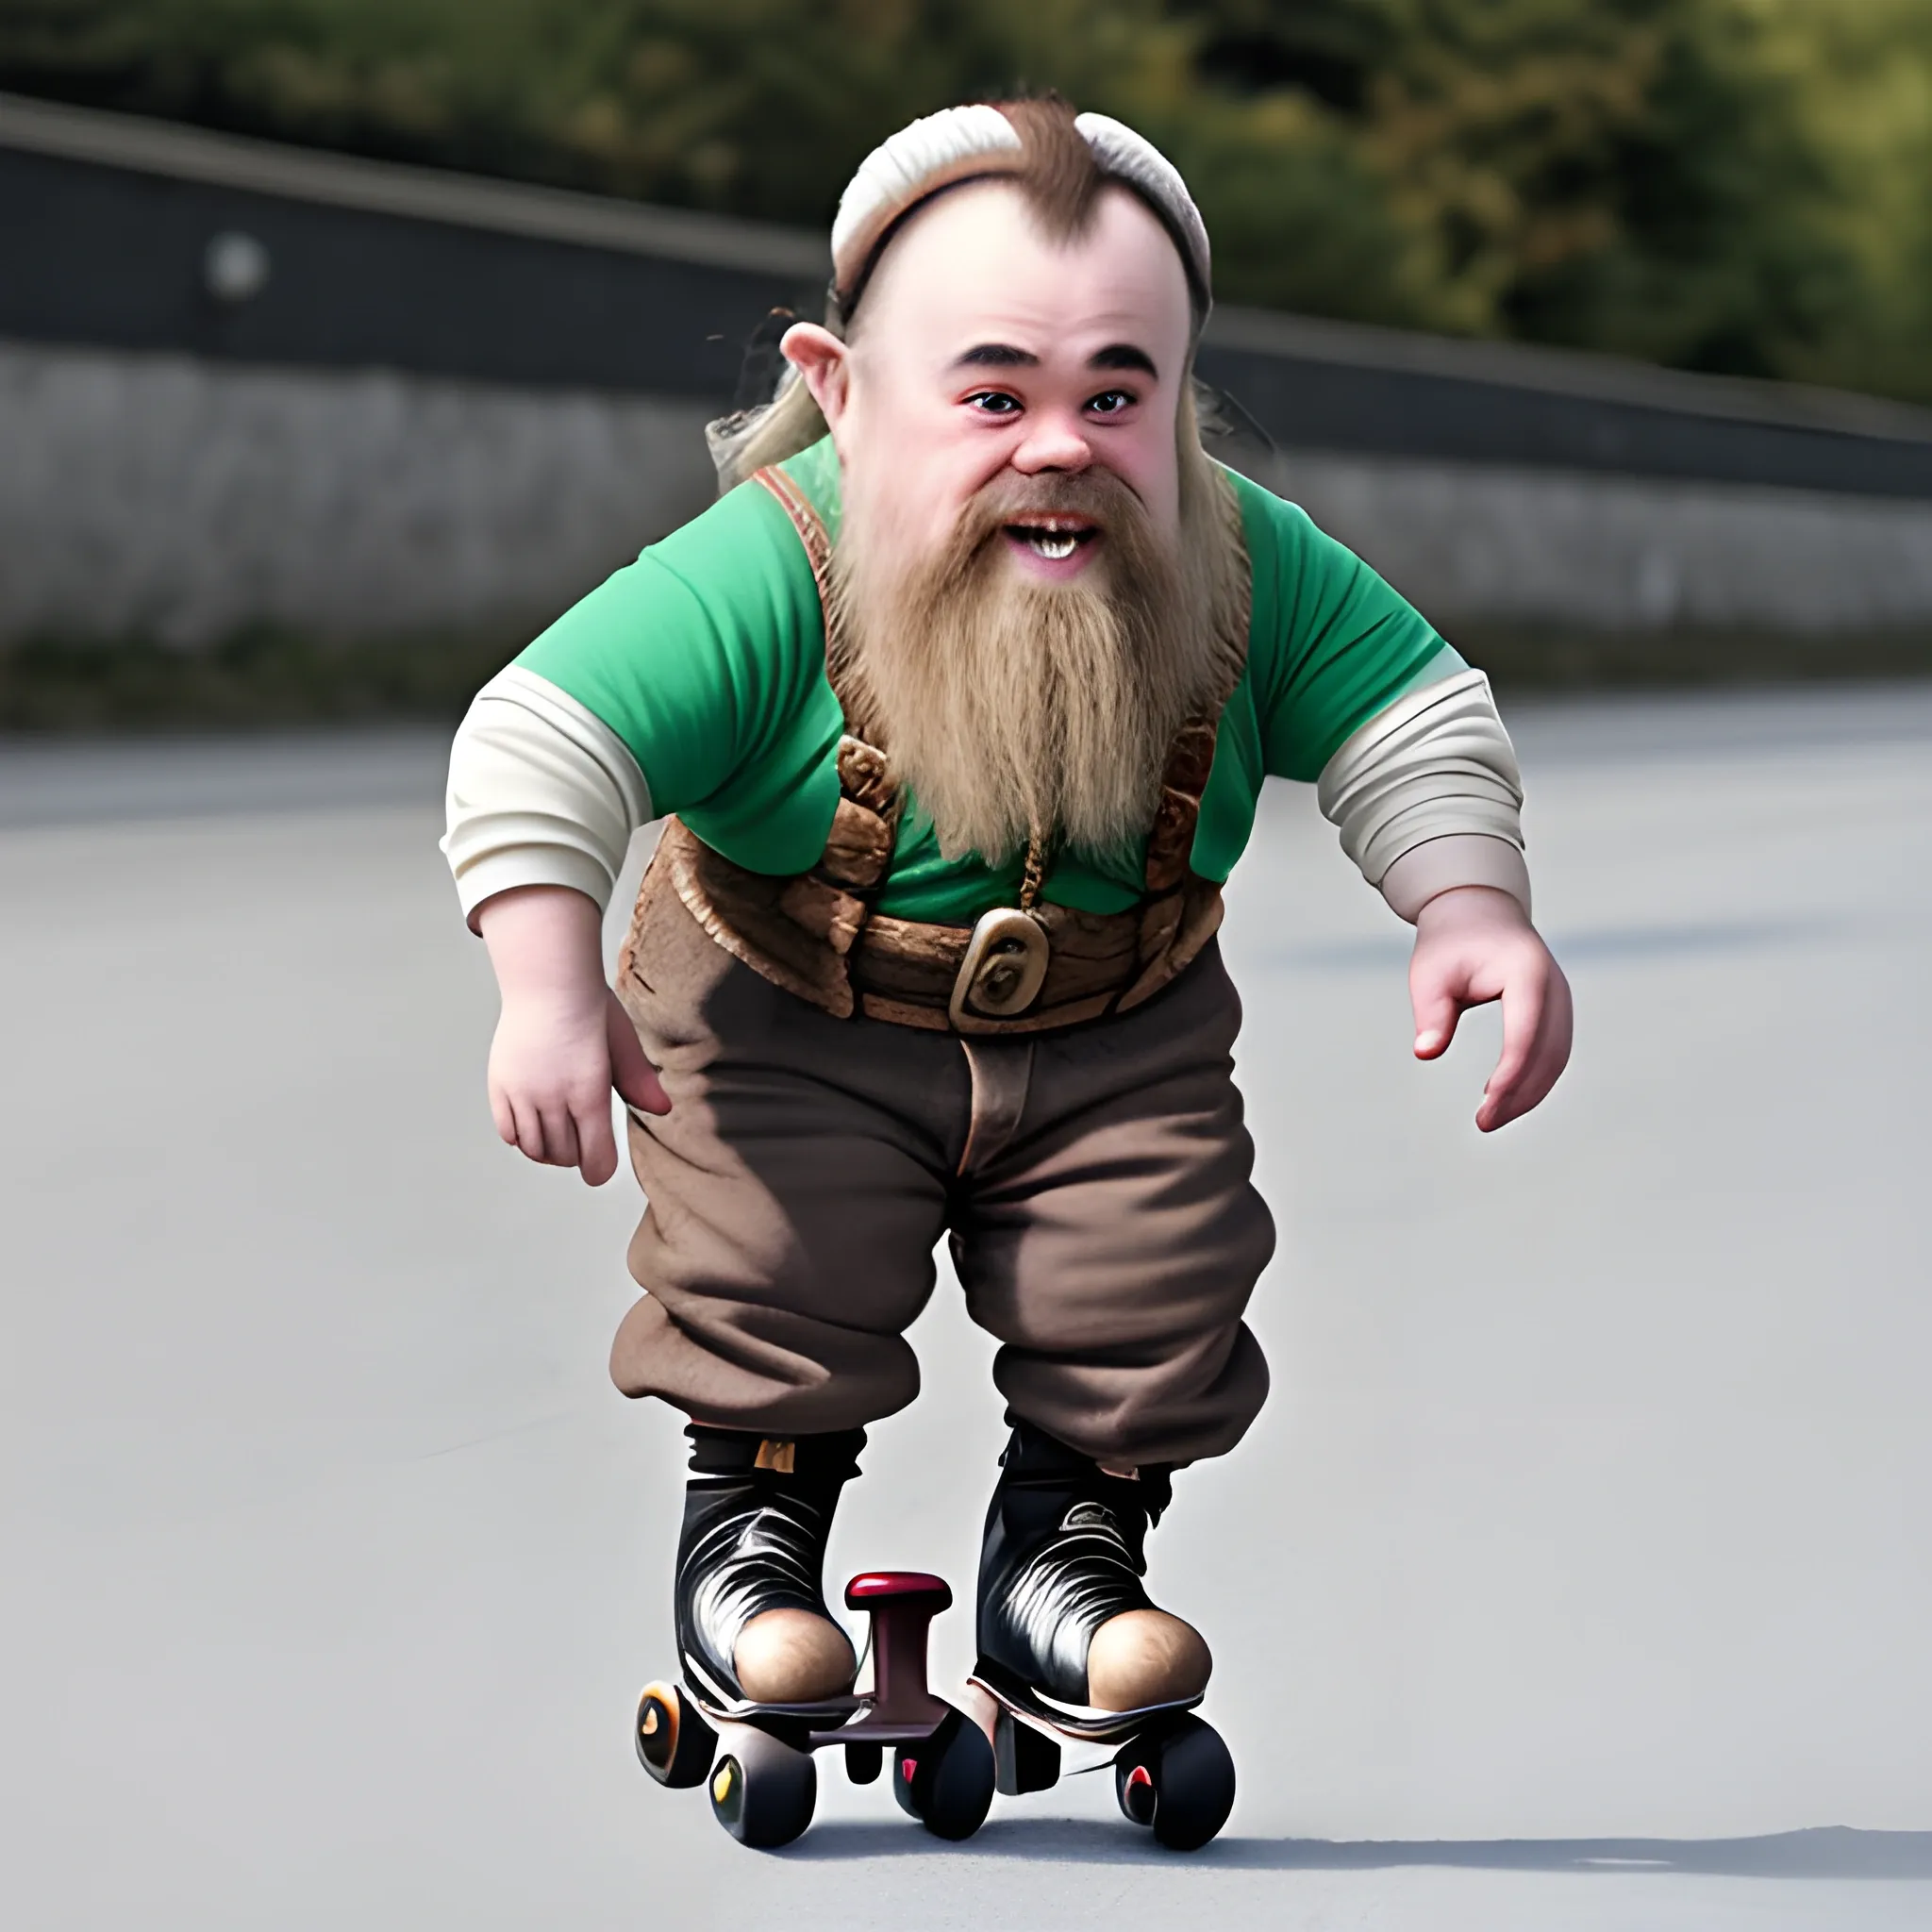 dwarf with down syndrome on rollerskates